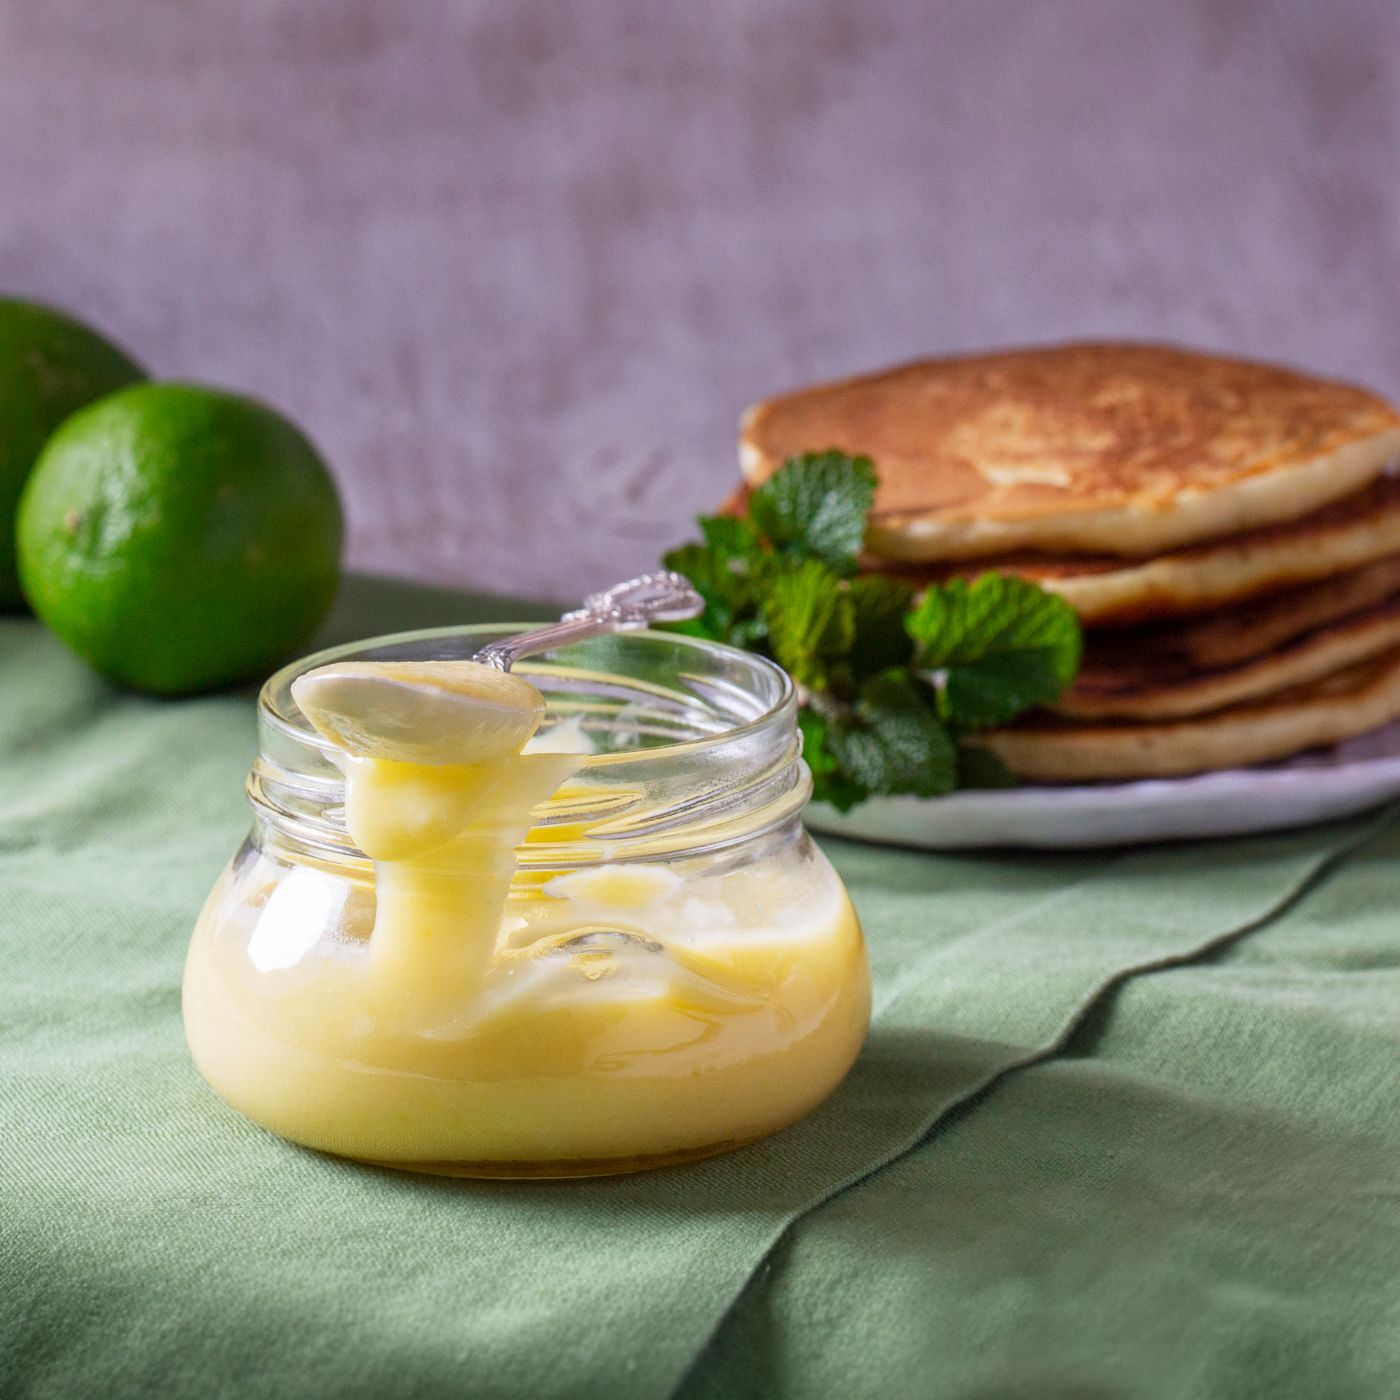 Custard-lime-curd-served-with-pancakes-on-a-light-background.-Rustic-style.-1480185119_2197x1368 square.jpeg